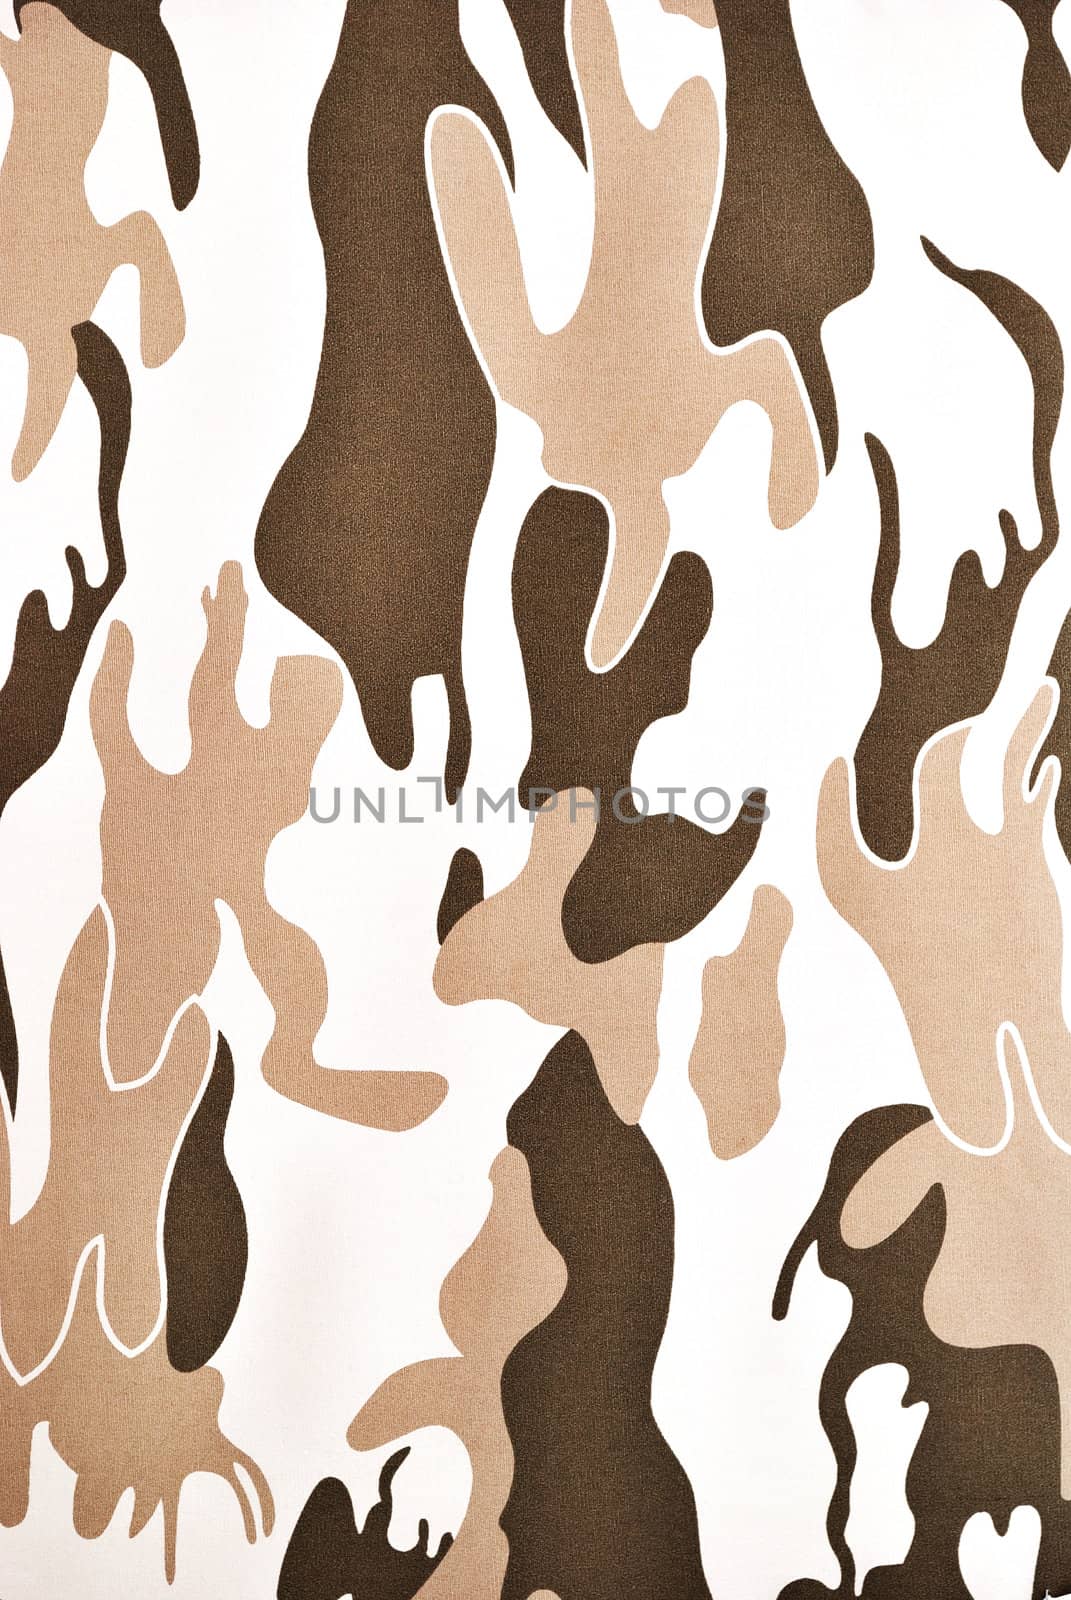 sample of camouflaged fabrics in a vertical orientation